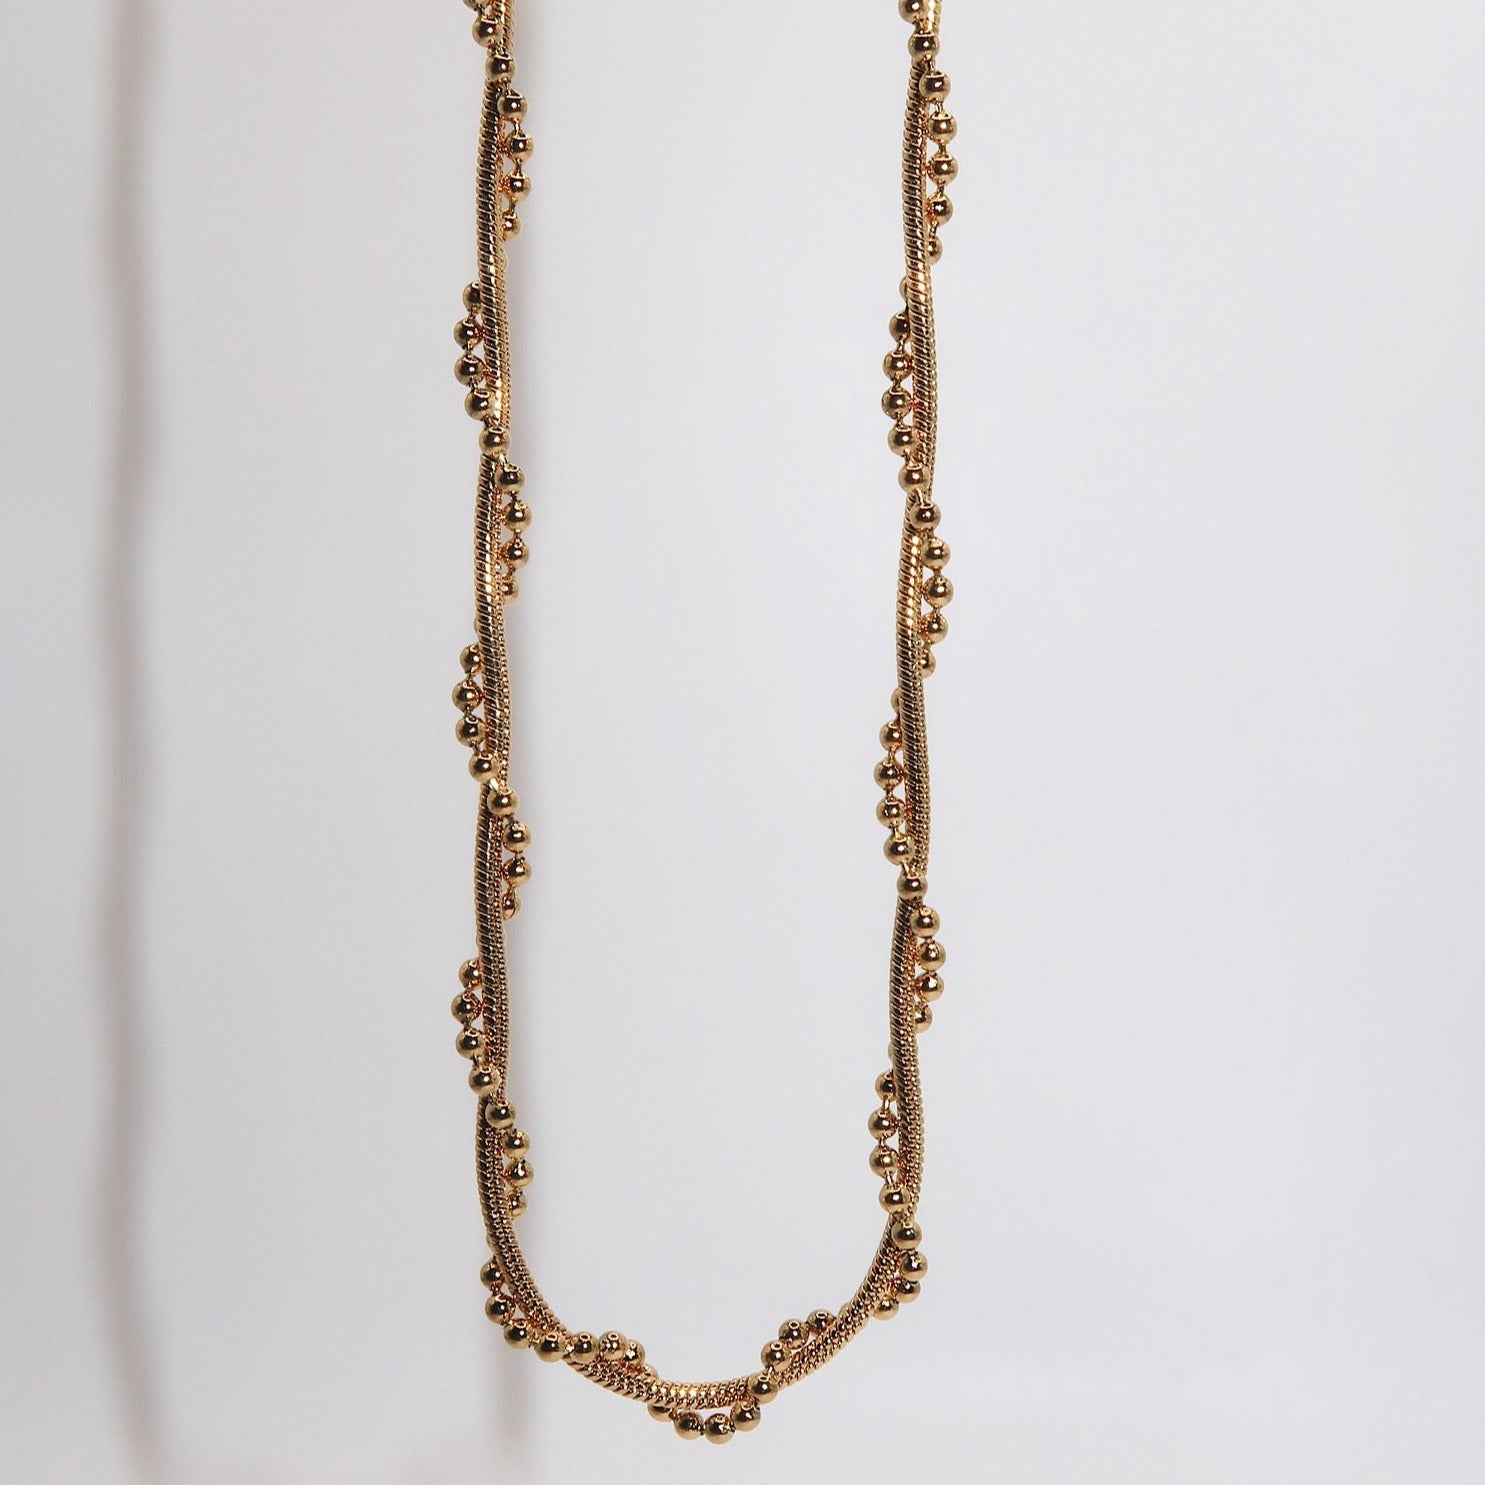 JENELL - 18K PVD Gold Plated Braided Necklace - Mixed Metals